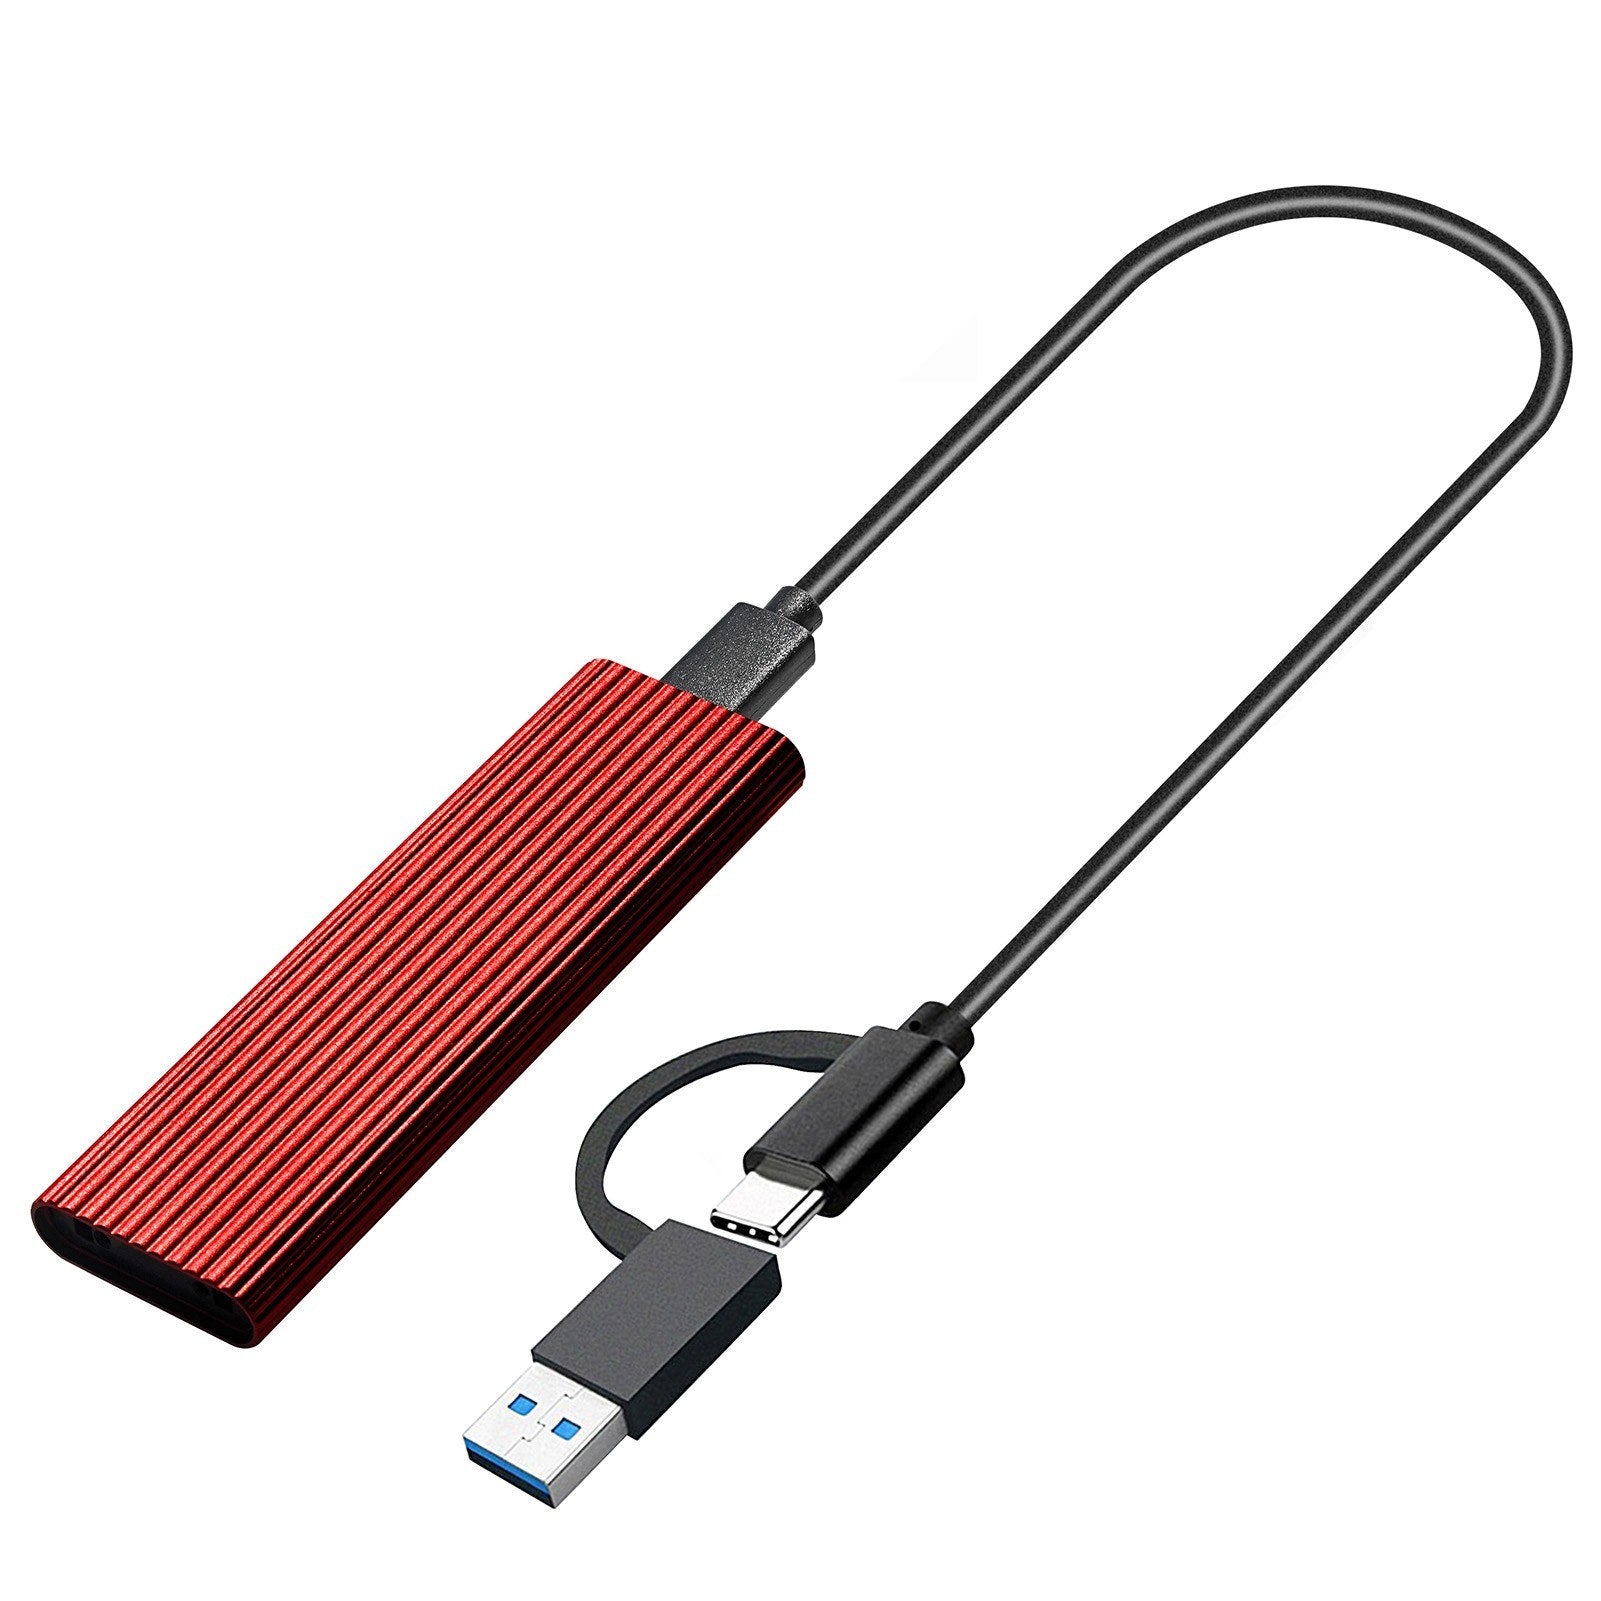 M.2 NVME/SATA Aluminum Alloy Hard Drive Enclosure 10Gbps High Speed Transmission Dual Protocol with OTG for M.2 SSD - Red